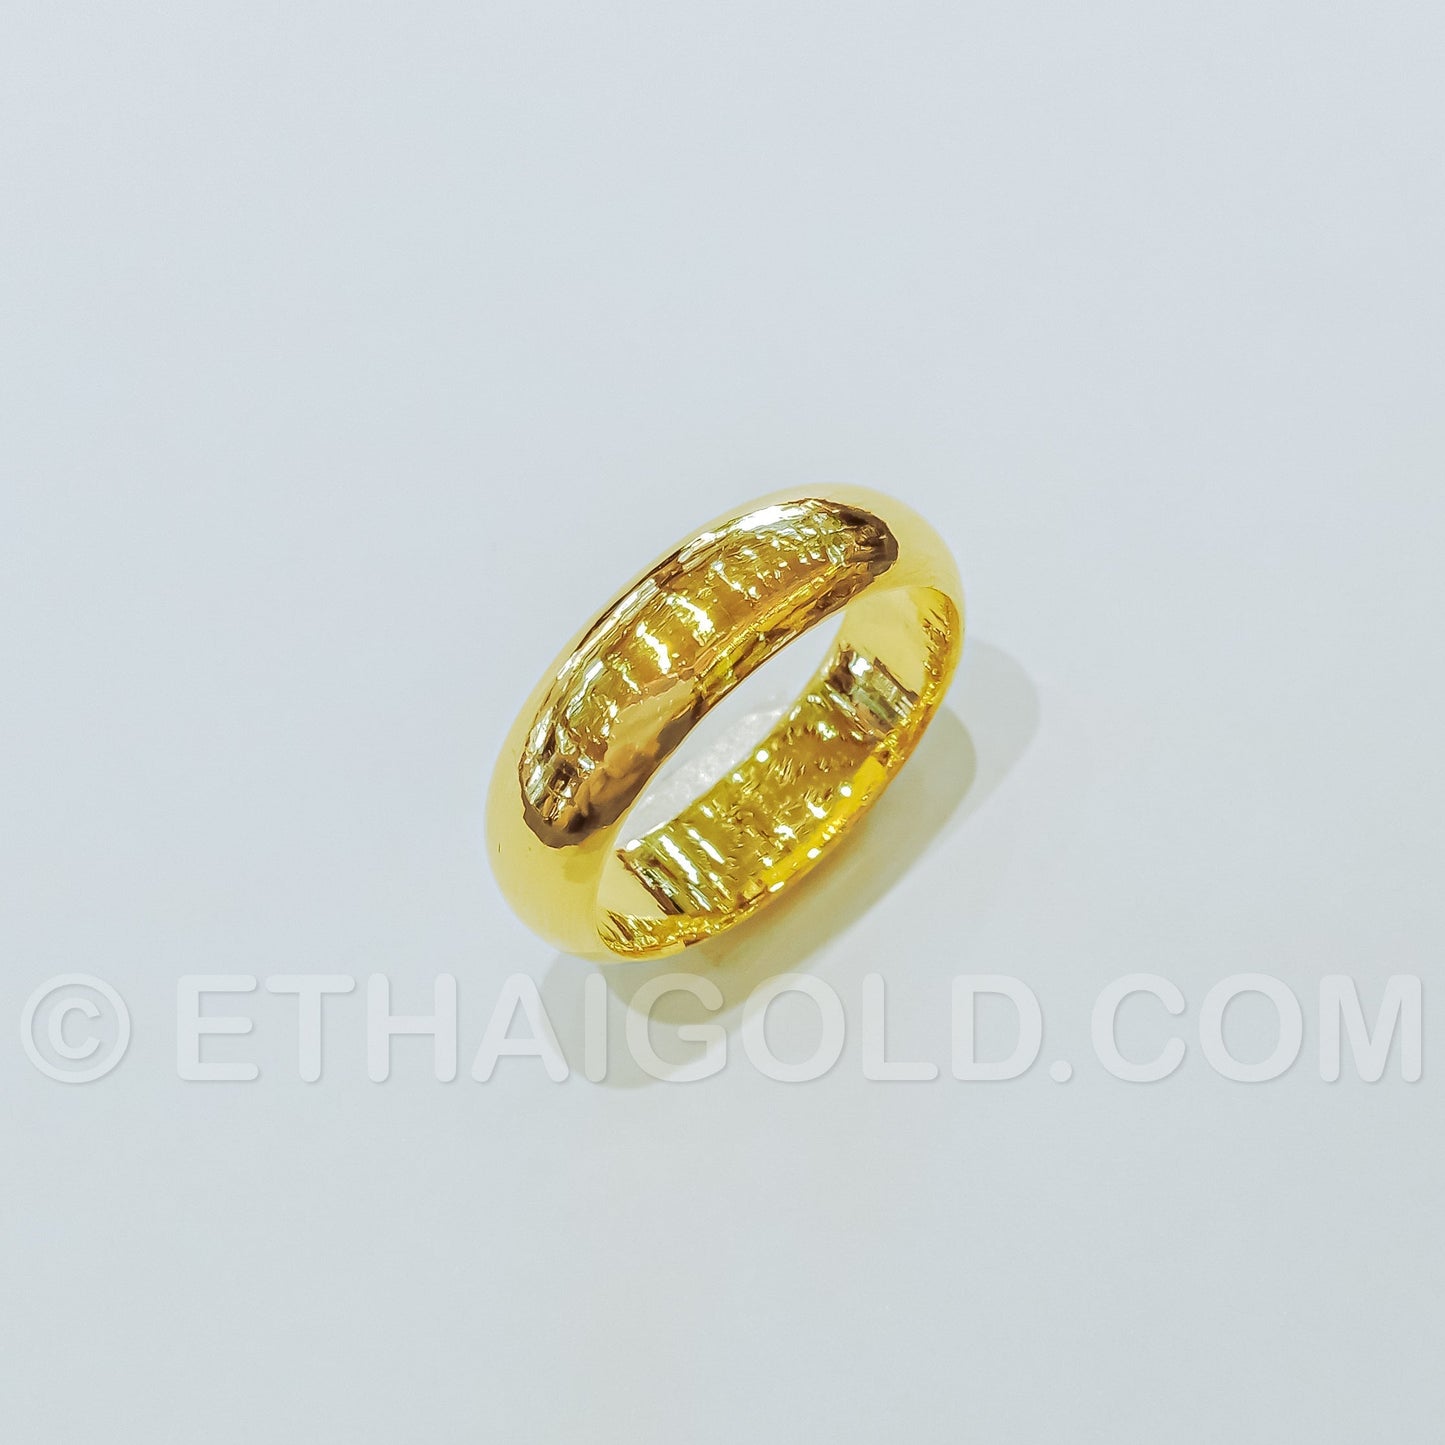 1 BAHT POLISHED SOLID DOMED WEDDING BAND RING IN 23K GOLD (ID: R0401B)